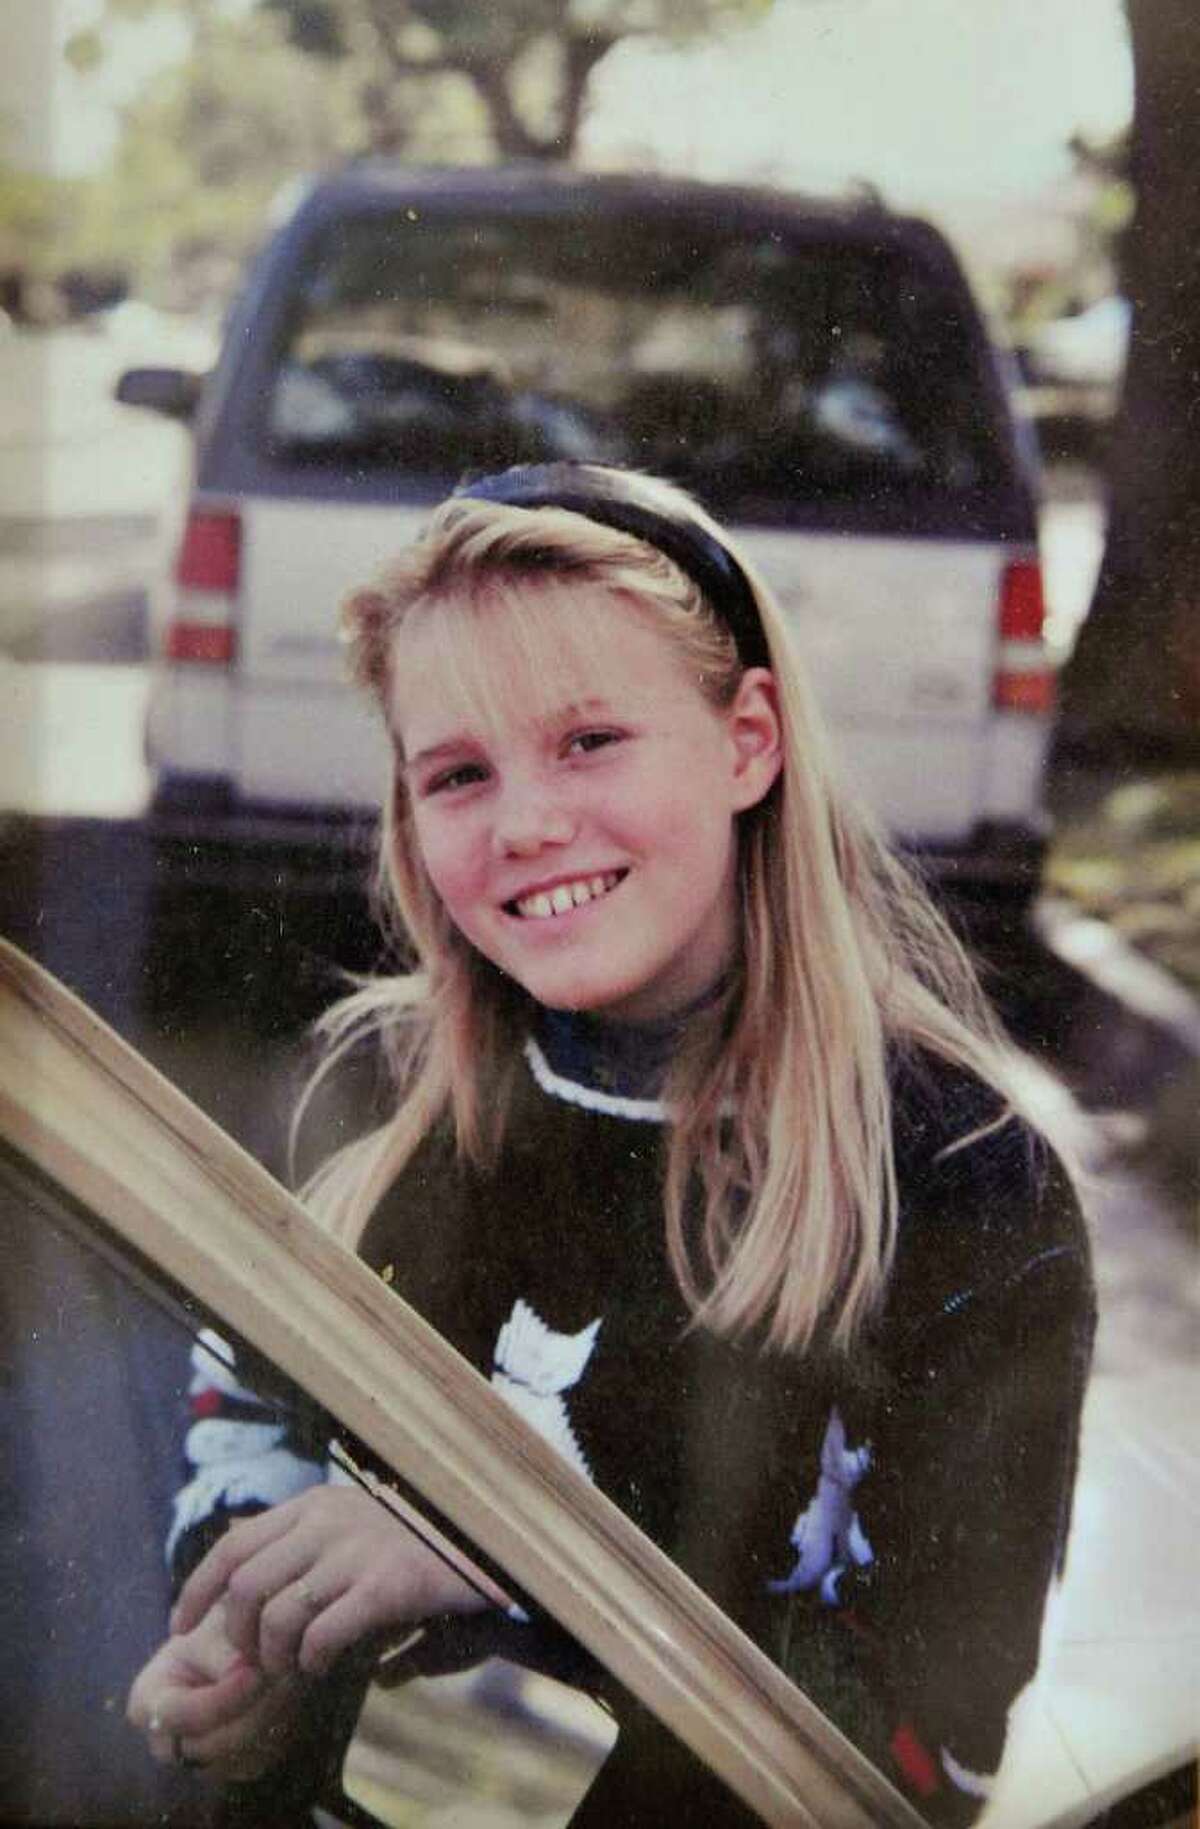 FILE -Jaycee Lee Dugard is seen in this undated file photo provided by her step father William Carl Probyn. Dugard, who was kidnapped, raped, and held captive for 18 years by Philip Garrido in California, delivered some parting words to Garrido as he's sent away to prison for the rest of his life. In a statement read by her mother, Jaycee Dugard said she chose not to be in court today because she didn't want to "waste another second" of her life in Garrido's presence. Garrido's wife, Nancy, was sentenced today to 36 years to life. (AP Photo/ William Carl Probyn via the Orange County Register, file)